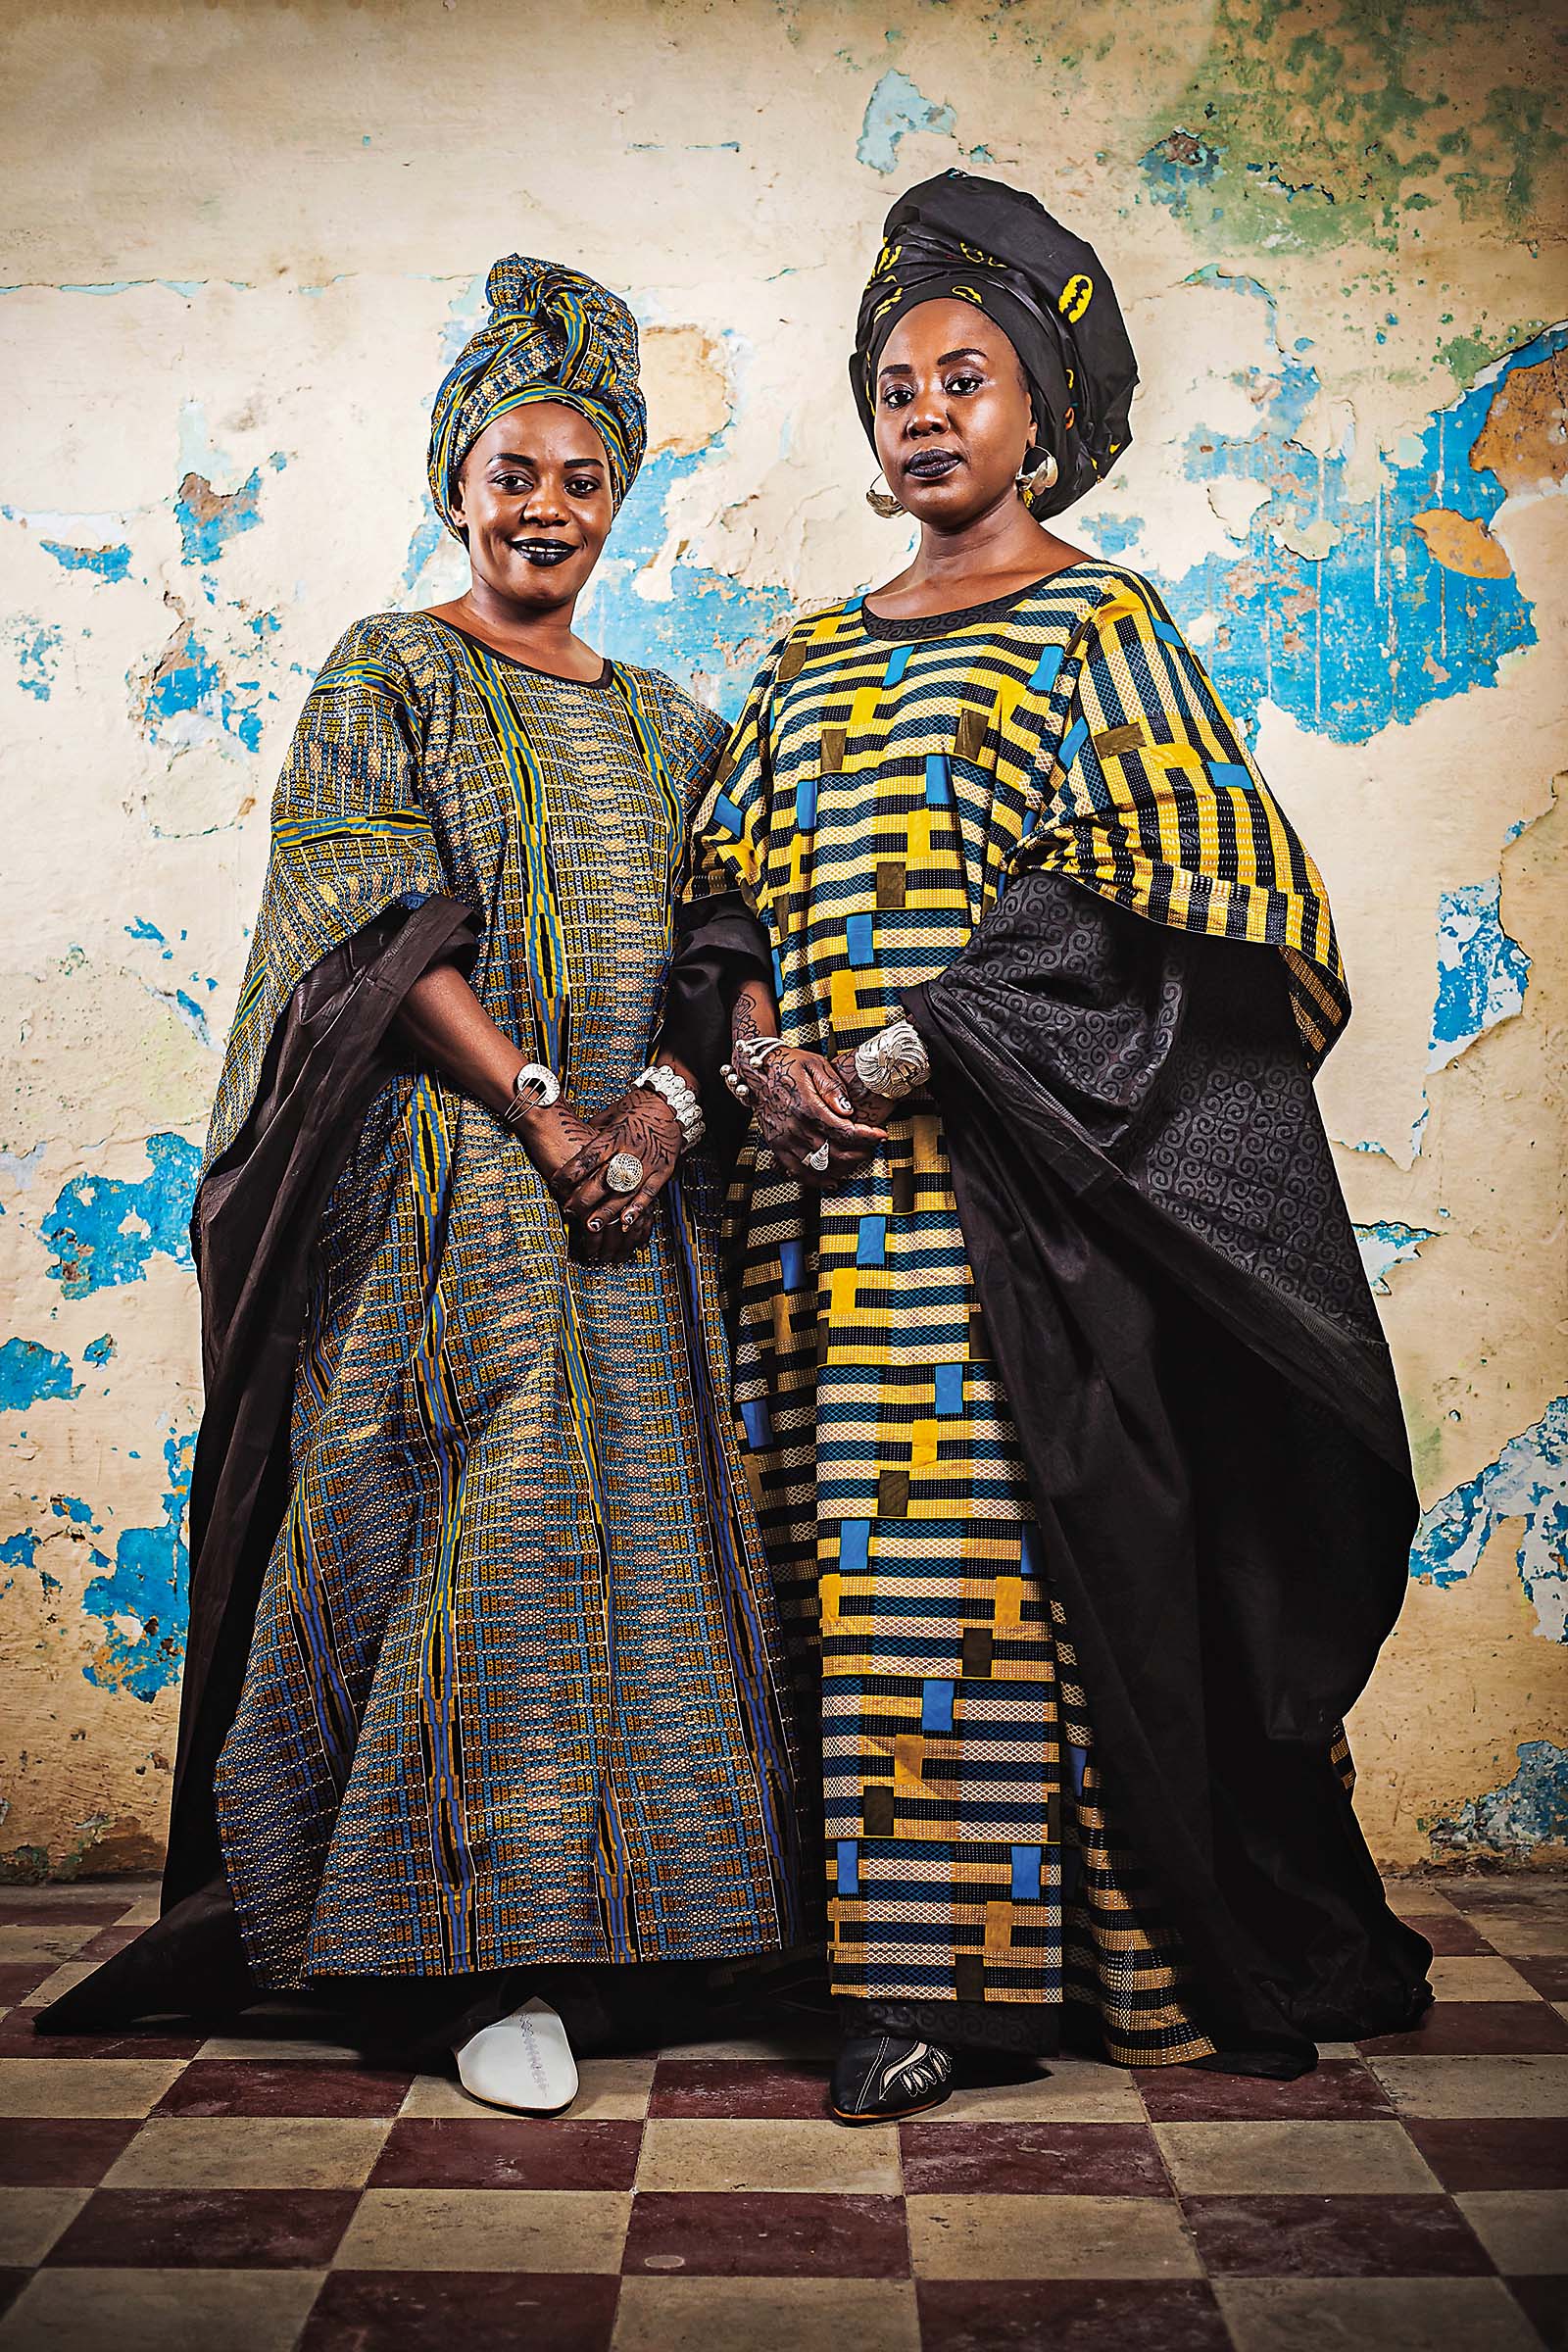 “Duet” comes from the Latin root word duo which means two. The Duet series focuses on double portraits, a tradition in West Africa. I try to create a duality, a resemblance between two people through gestures, clothing, poses, etc. This series includes portraits of relatives, friends and people united by other ties. This particular image is one from a series showing portraits of men and women pridefully posing in front of walls reminiscent of Saint-Louis, Senegal, and its architectural heritage, old buildings steeped in history. At their feet lies a dark checkerboard reminiscent of traditional photo studios.